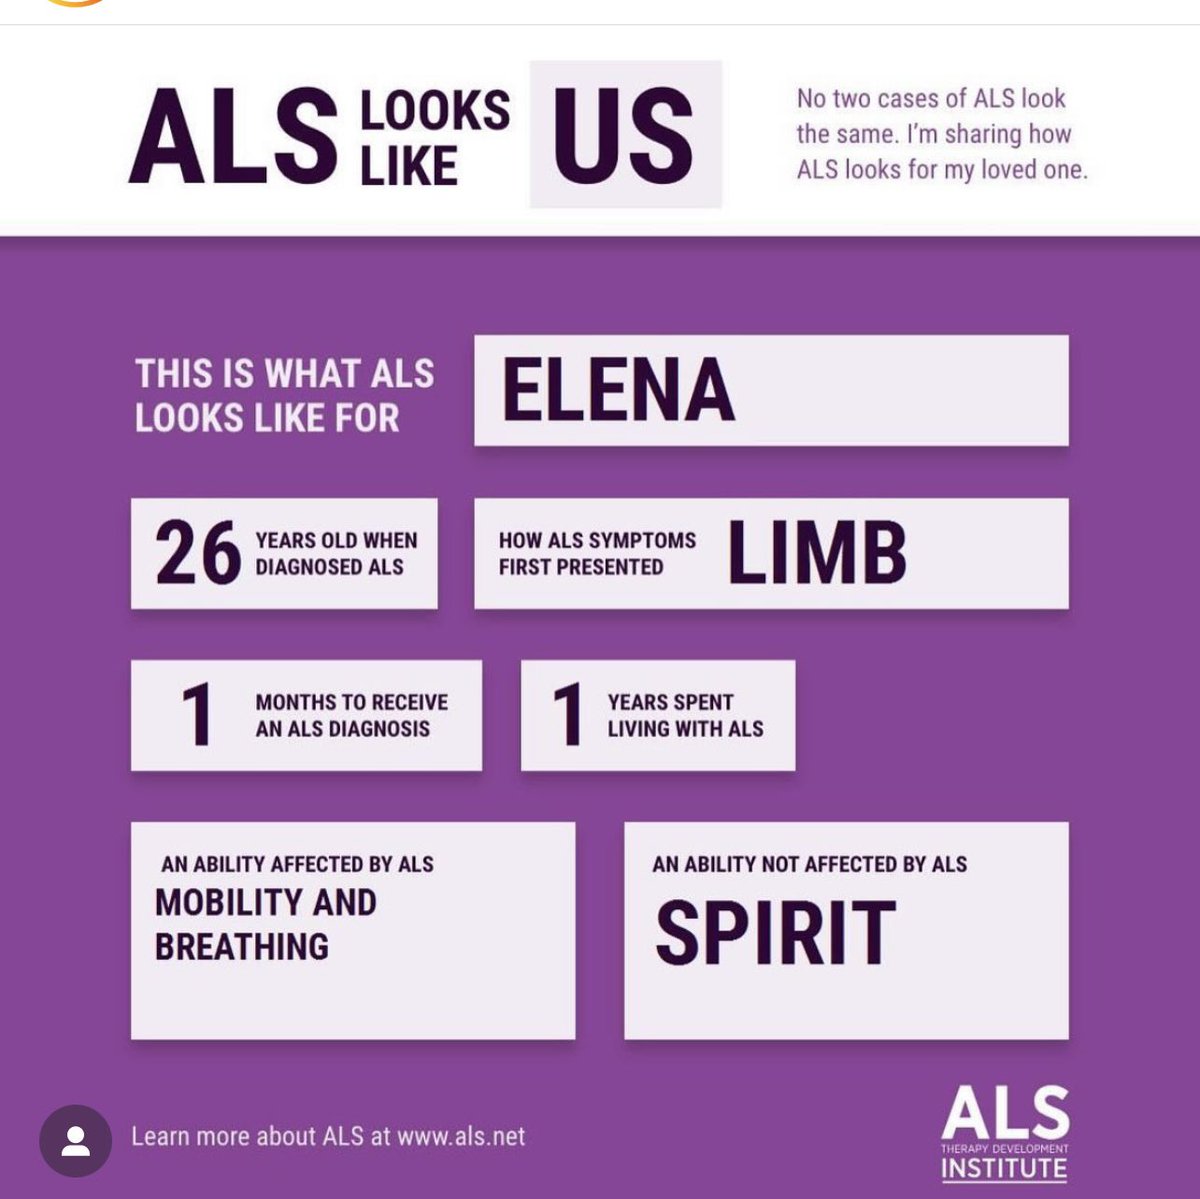 What does #ALS look like? It looks like a Bodybuilder. It looks like a vibrant young woman. It looks like a Dad. I never thought #ALS would look like that. Bet you didn’t either. #ALSAwarenessMonth #MondayMorning @ALSTDI #InspireOthers @crossfitcincinn 🌻